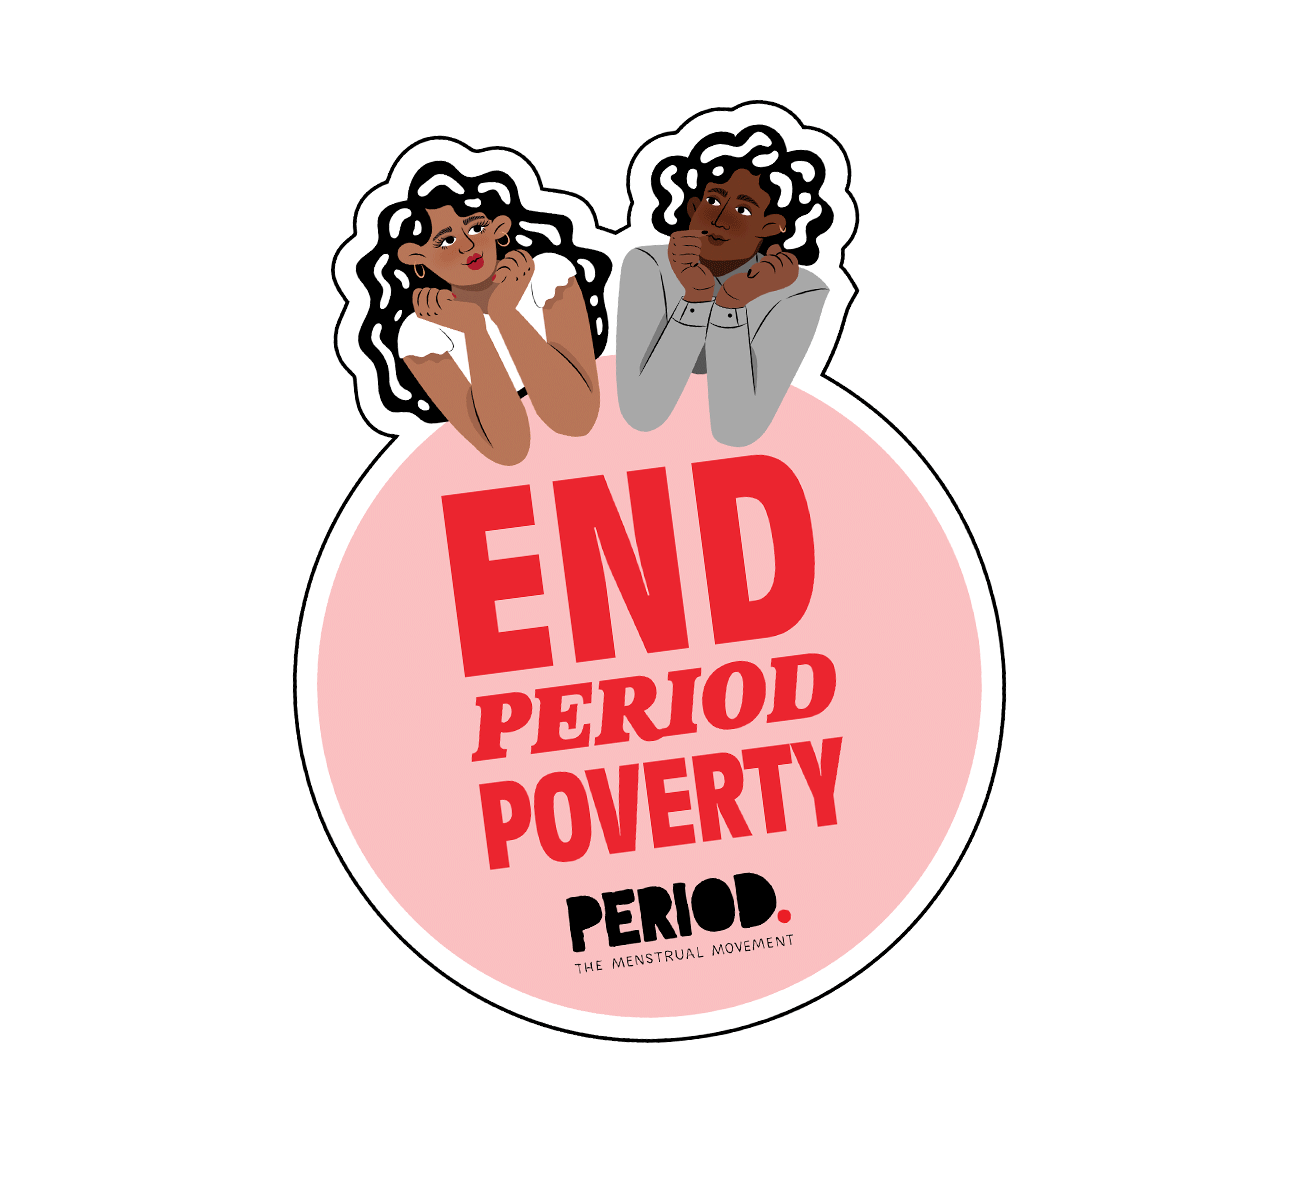 Characters-End-Period-Poverty-01.gif